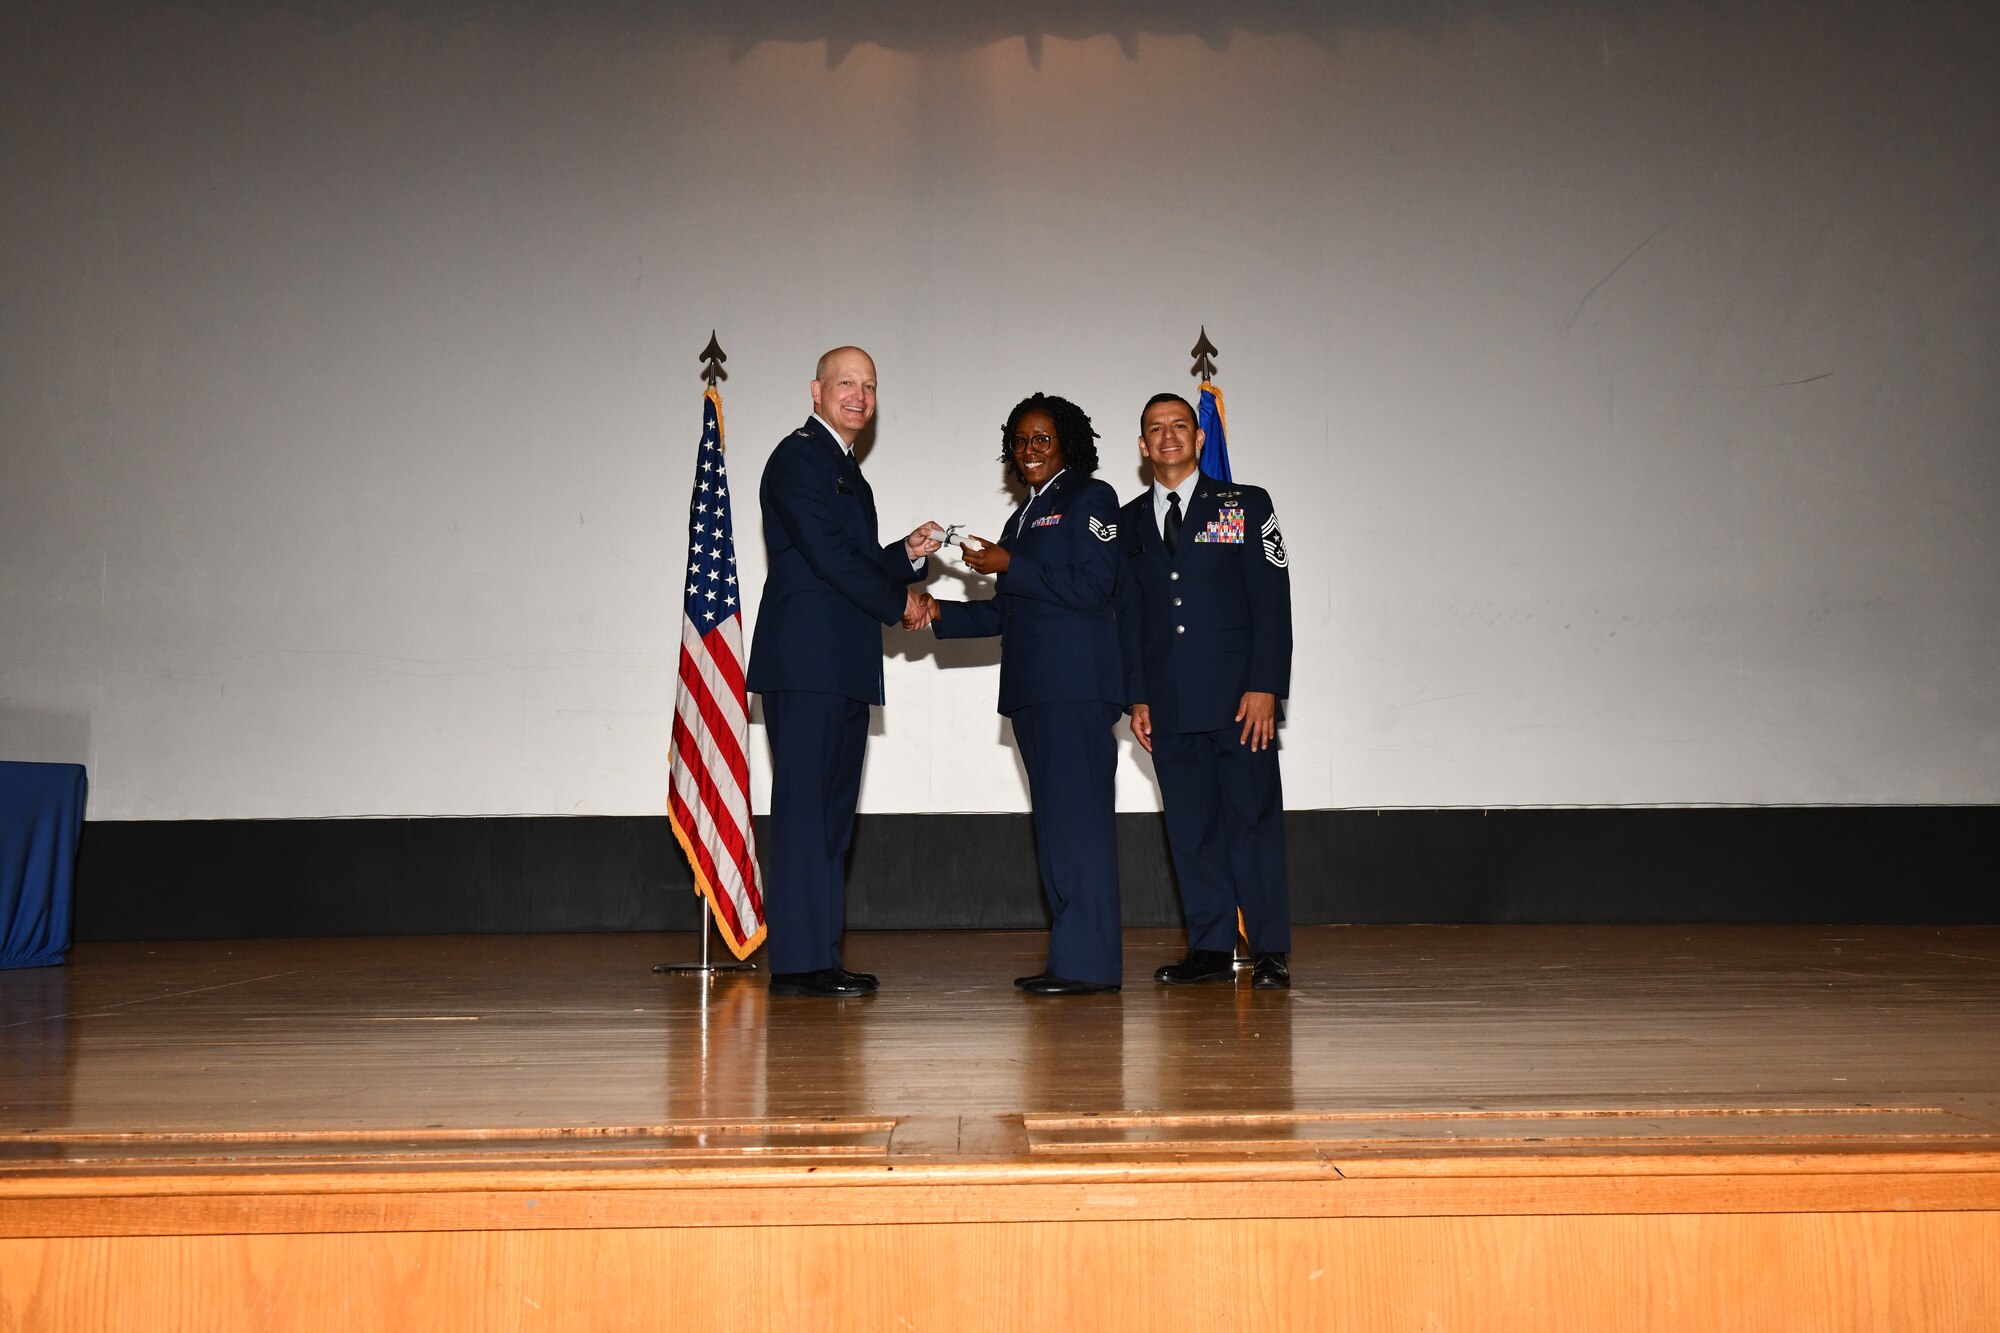 U.S. Air Force Staff Sgt. Sequoia Vandenburg, 97th Medical Group dental assistant, accepts a Community College of the Air Force (CCAF) degree from the 97th Air Mobility Wing command team during a CCAF graduation at Altus Air Force Base, Oklahoma, April 29, 2022. Twenty-five  Airmen received their degrees during the ceremony. (U.S. Air Force photo by Airman 1st Class Miyah Gray)